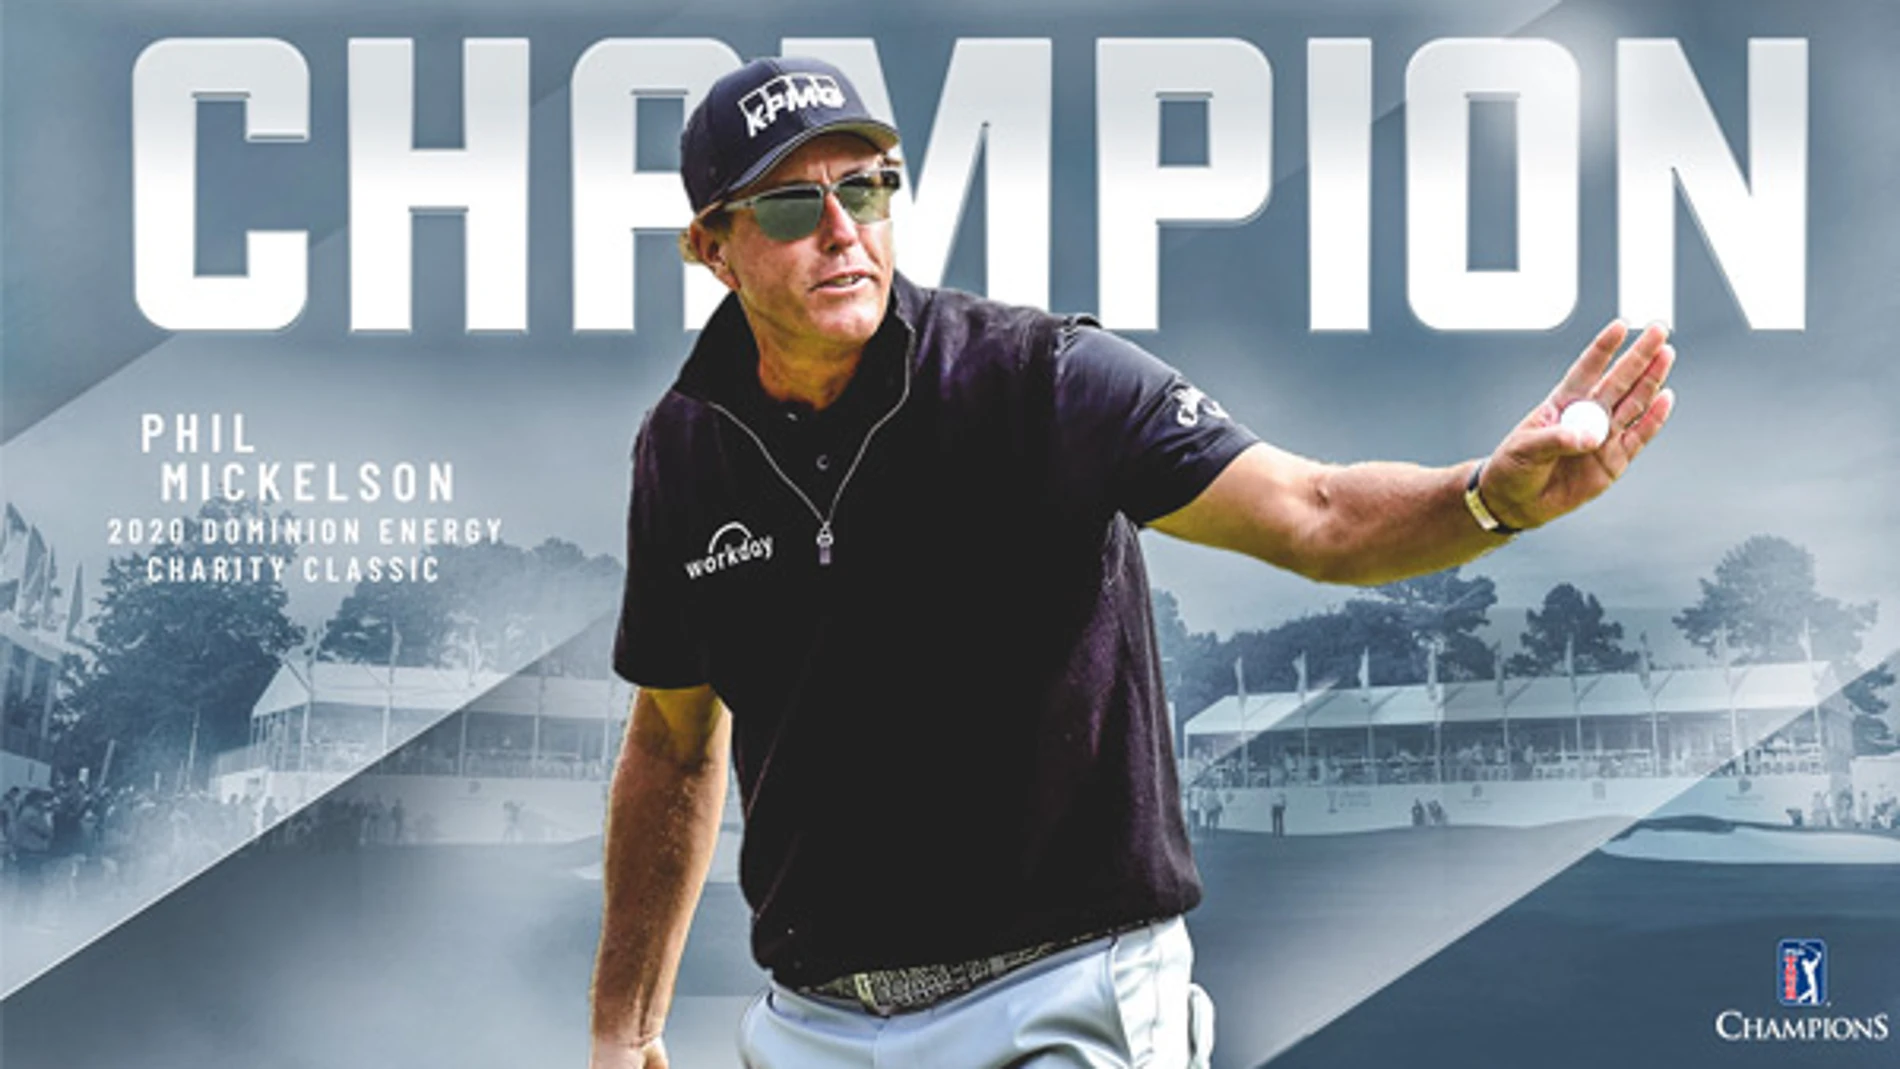 Triunfo Phil Mickelson en el Dominion Energy Charity Classic.